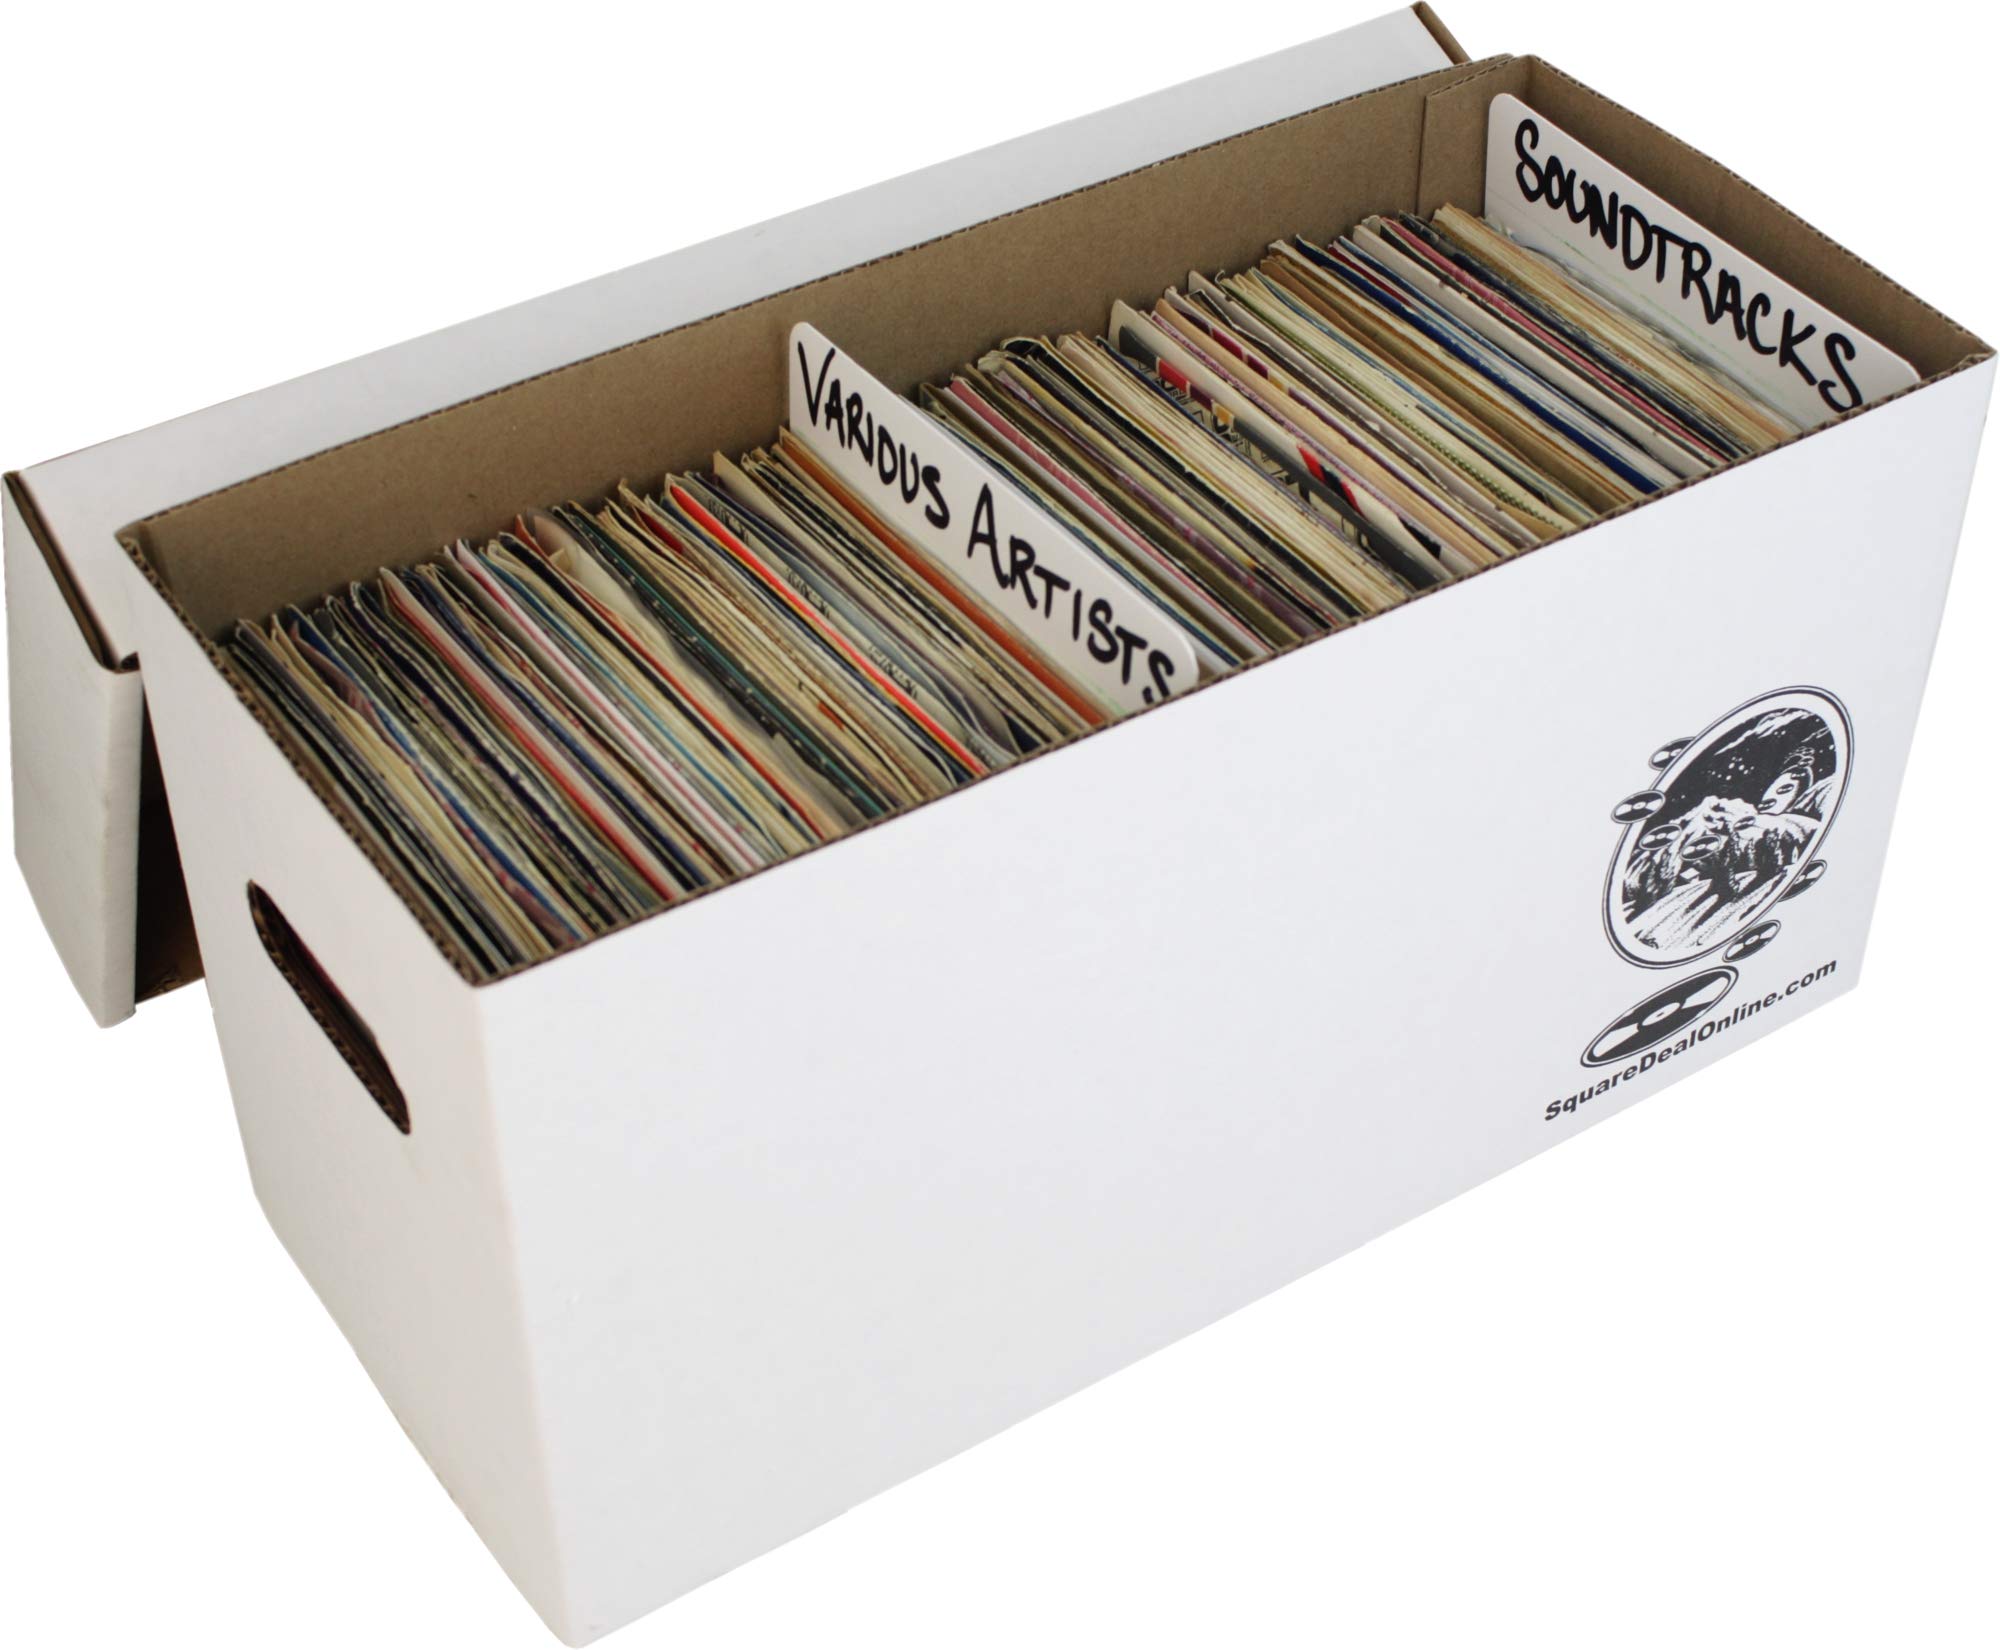 Square Deal Recordings & Supplies Set of 5-7 inch 45rpm Vinyl Record Storage Box - Sturdy Cardboard with Removable Lid - Holds up to 200 7 inch Records